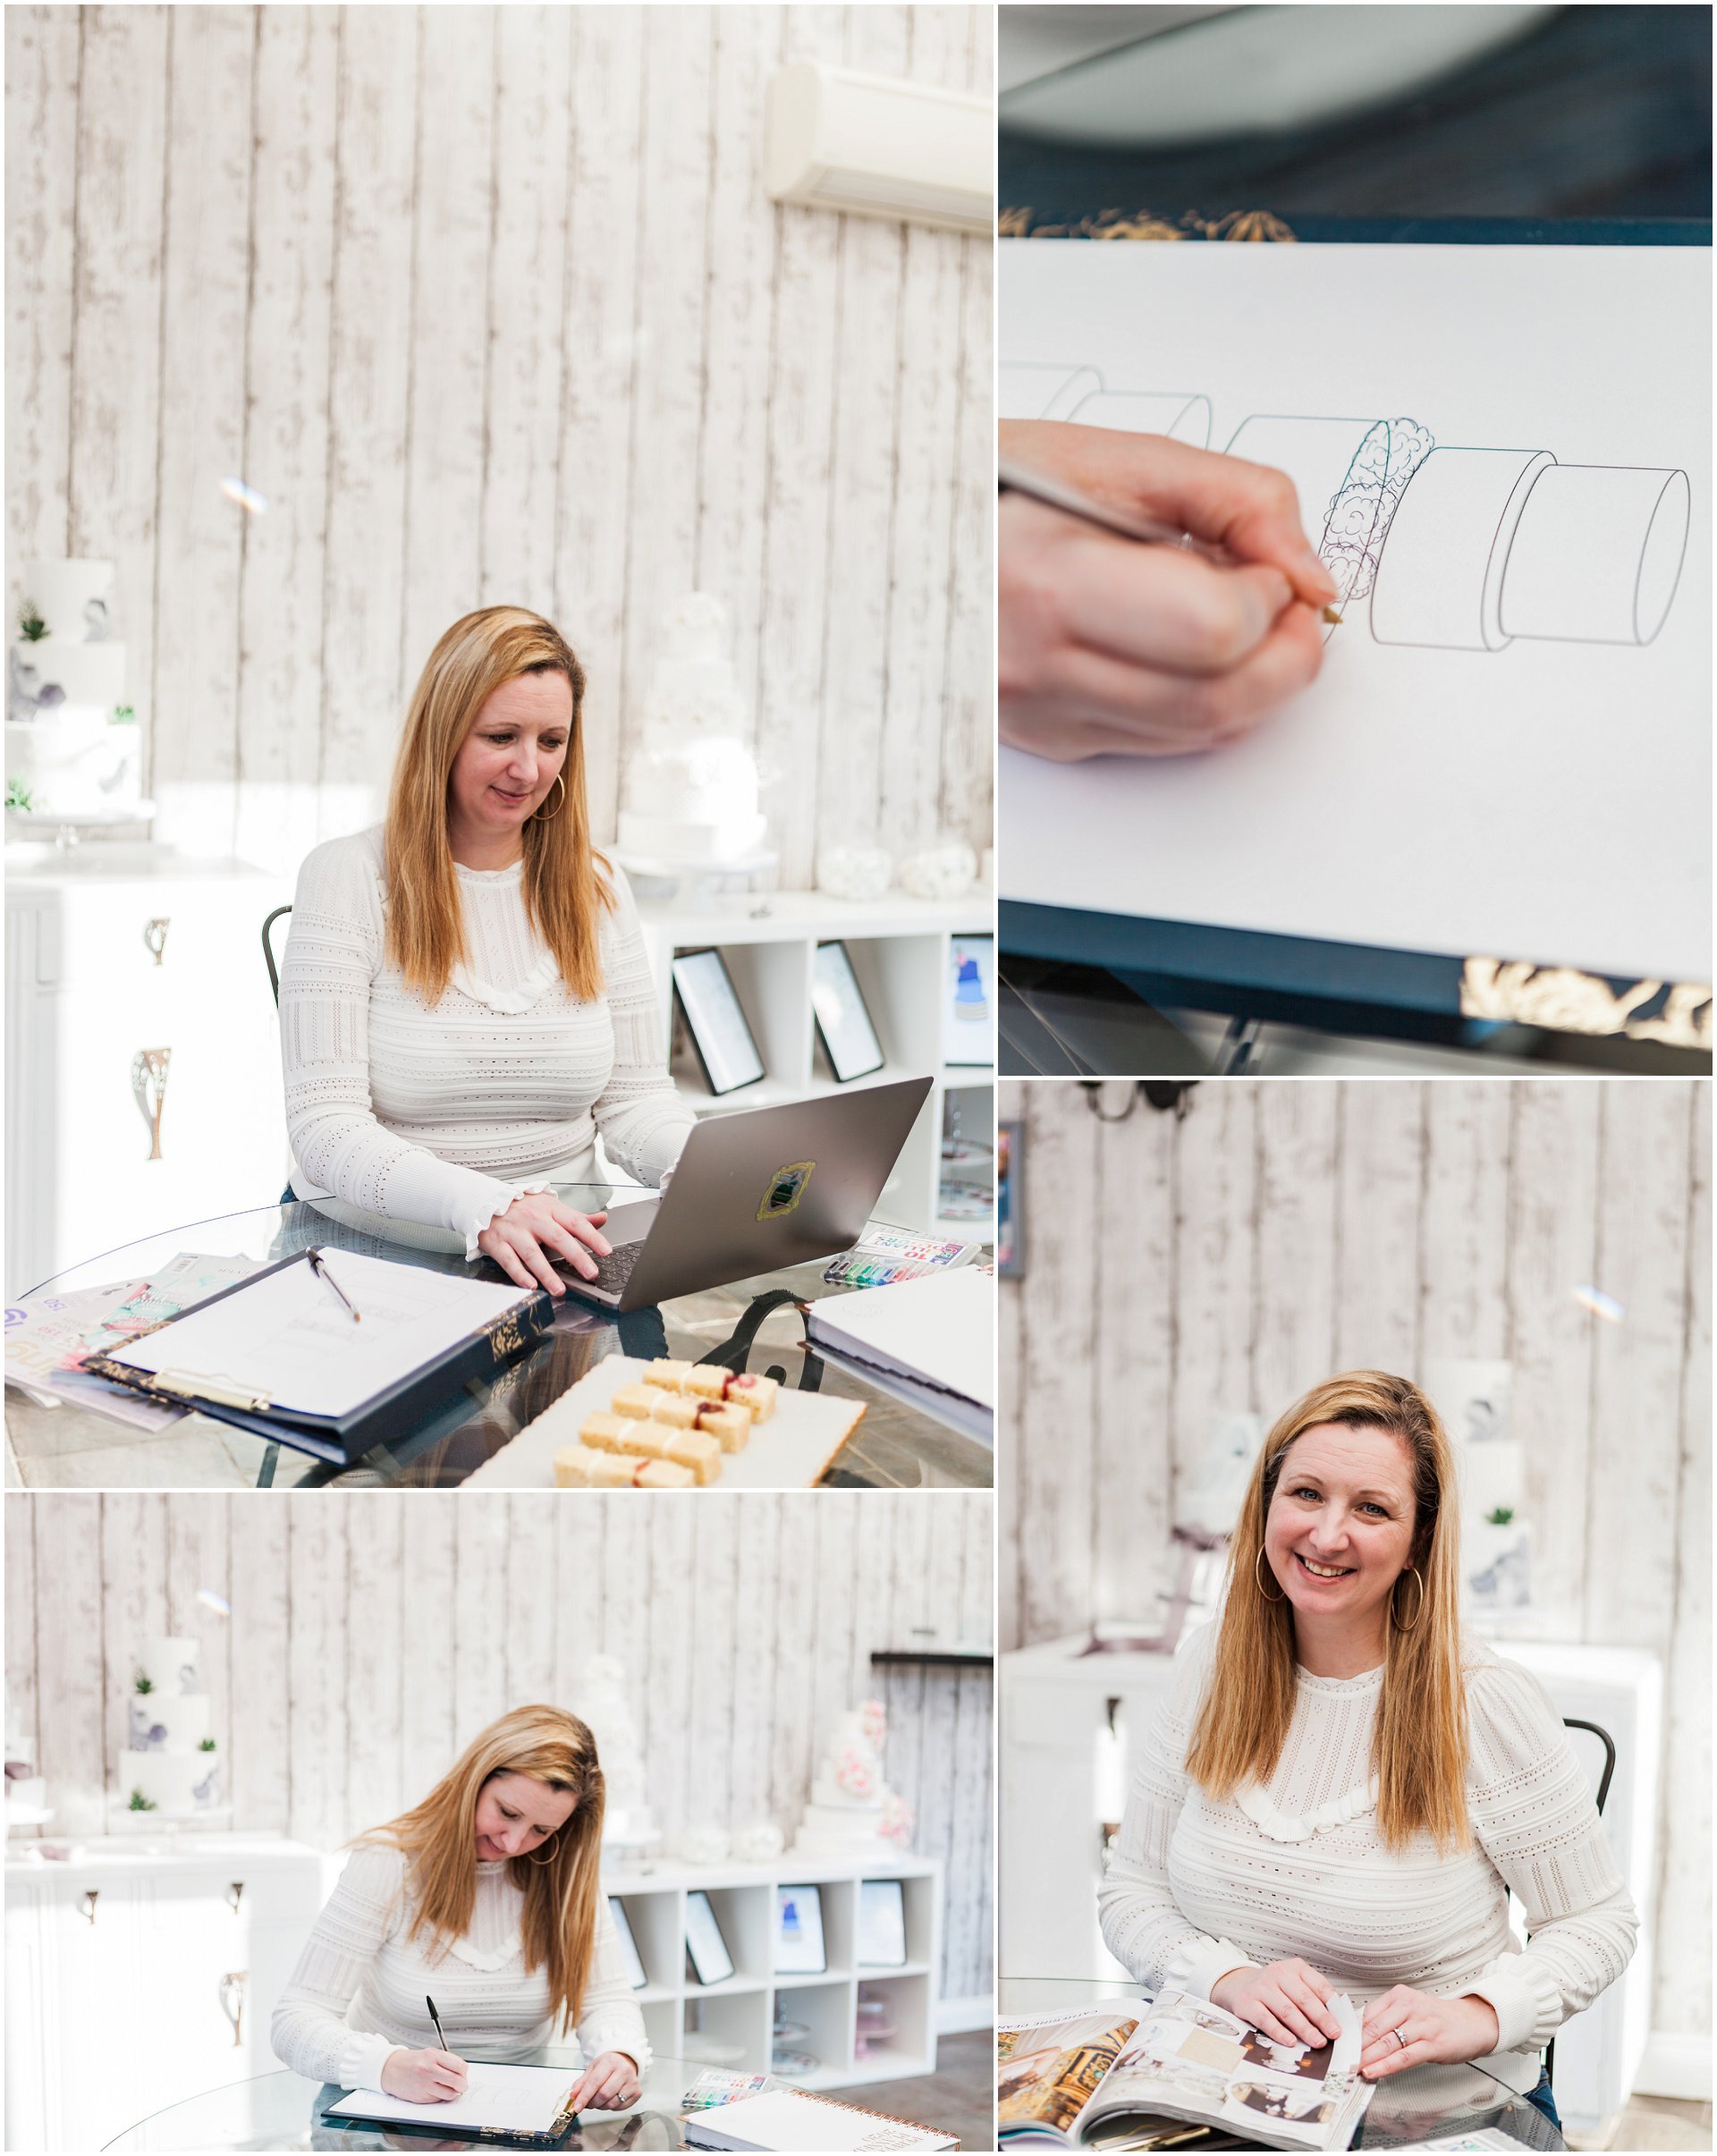 Images of Shelly Shulman, owner of La Belle Cakes sketching and designing wedding cakes. Images by London brand photographer AKP Branding Stories